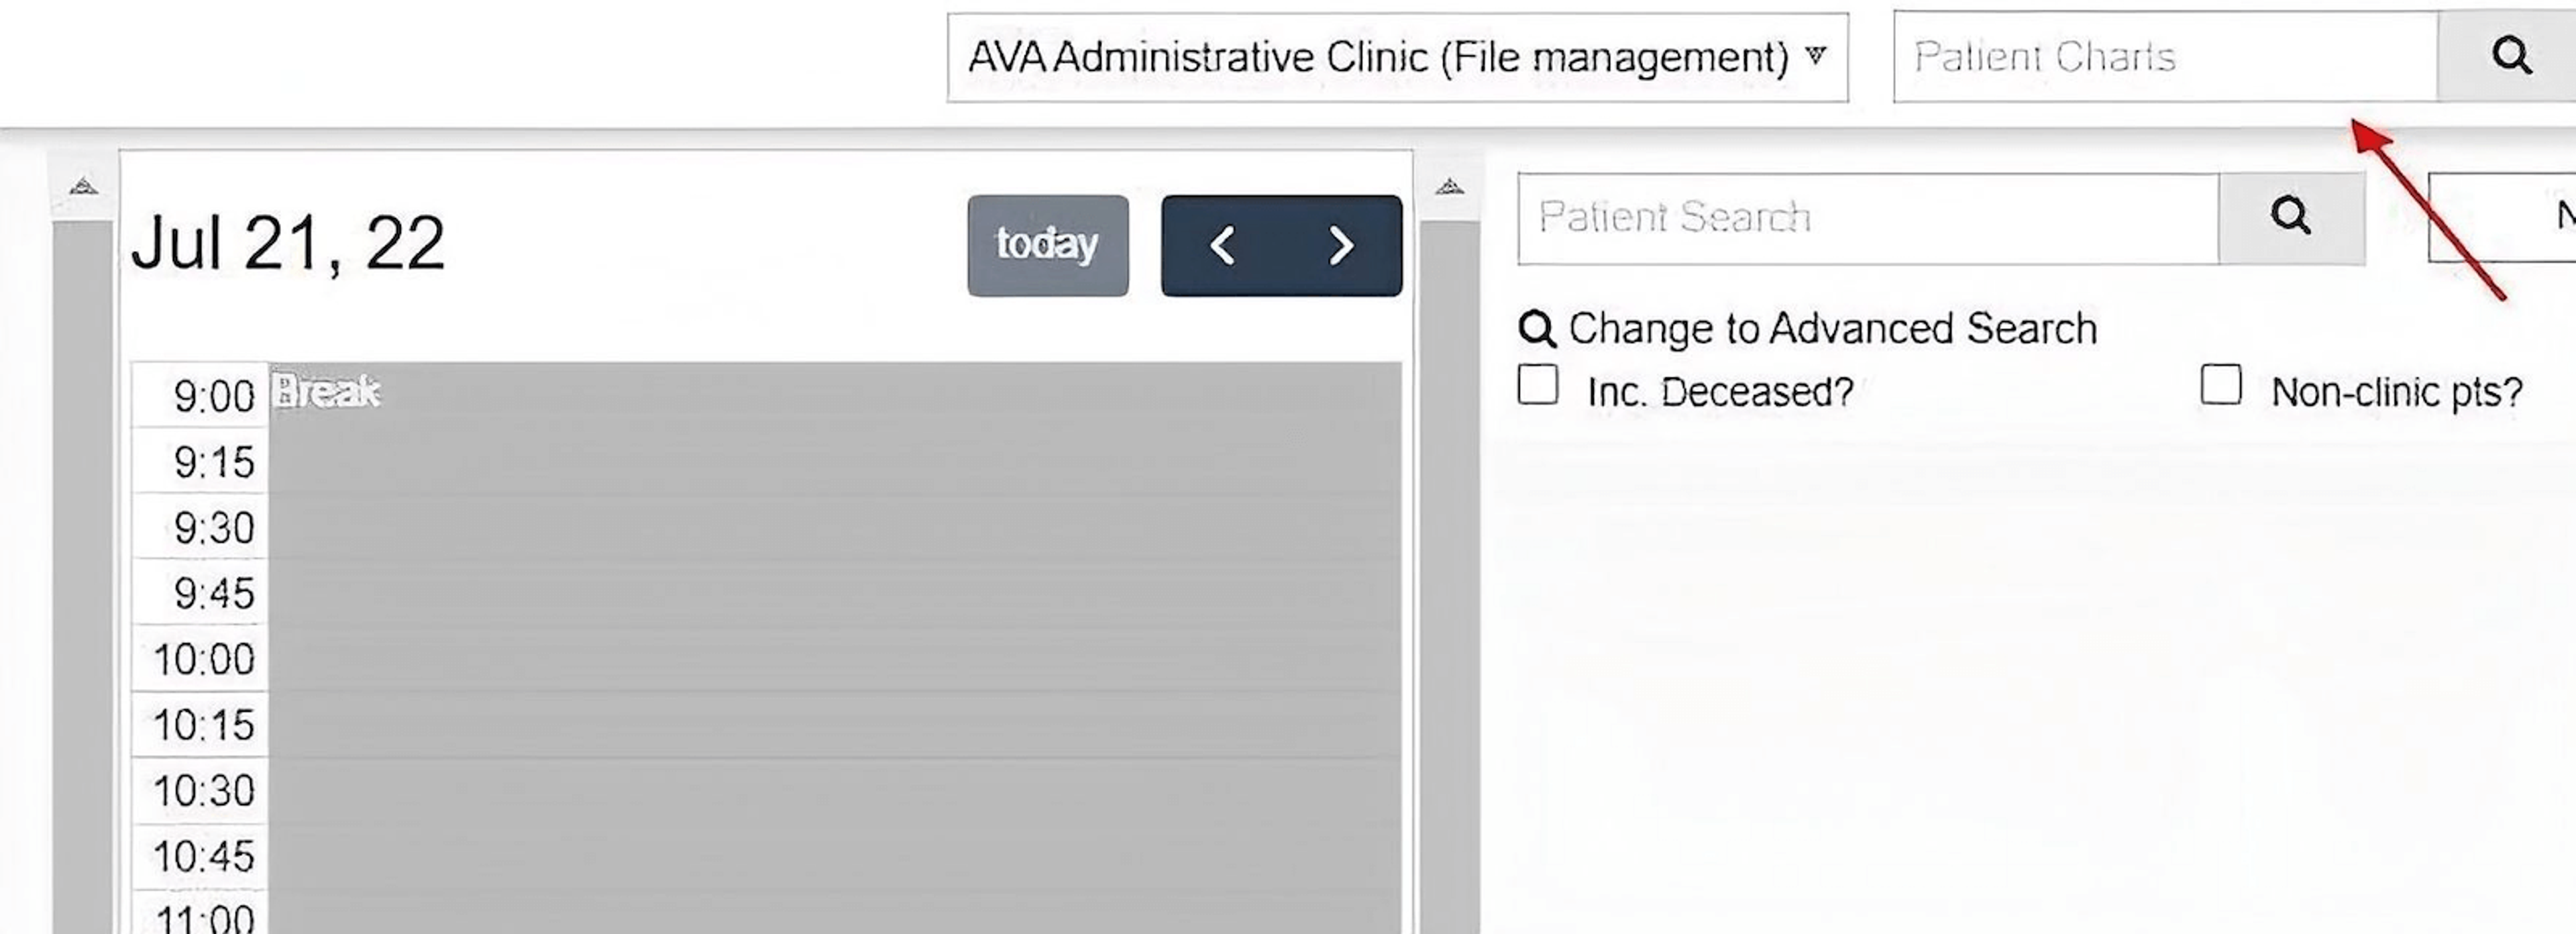 Calendar workspace with a red arrow pointing to a field labeled 'Patient Charts'